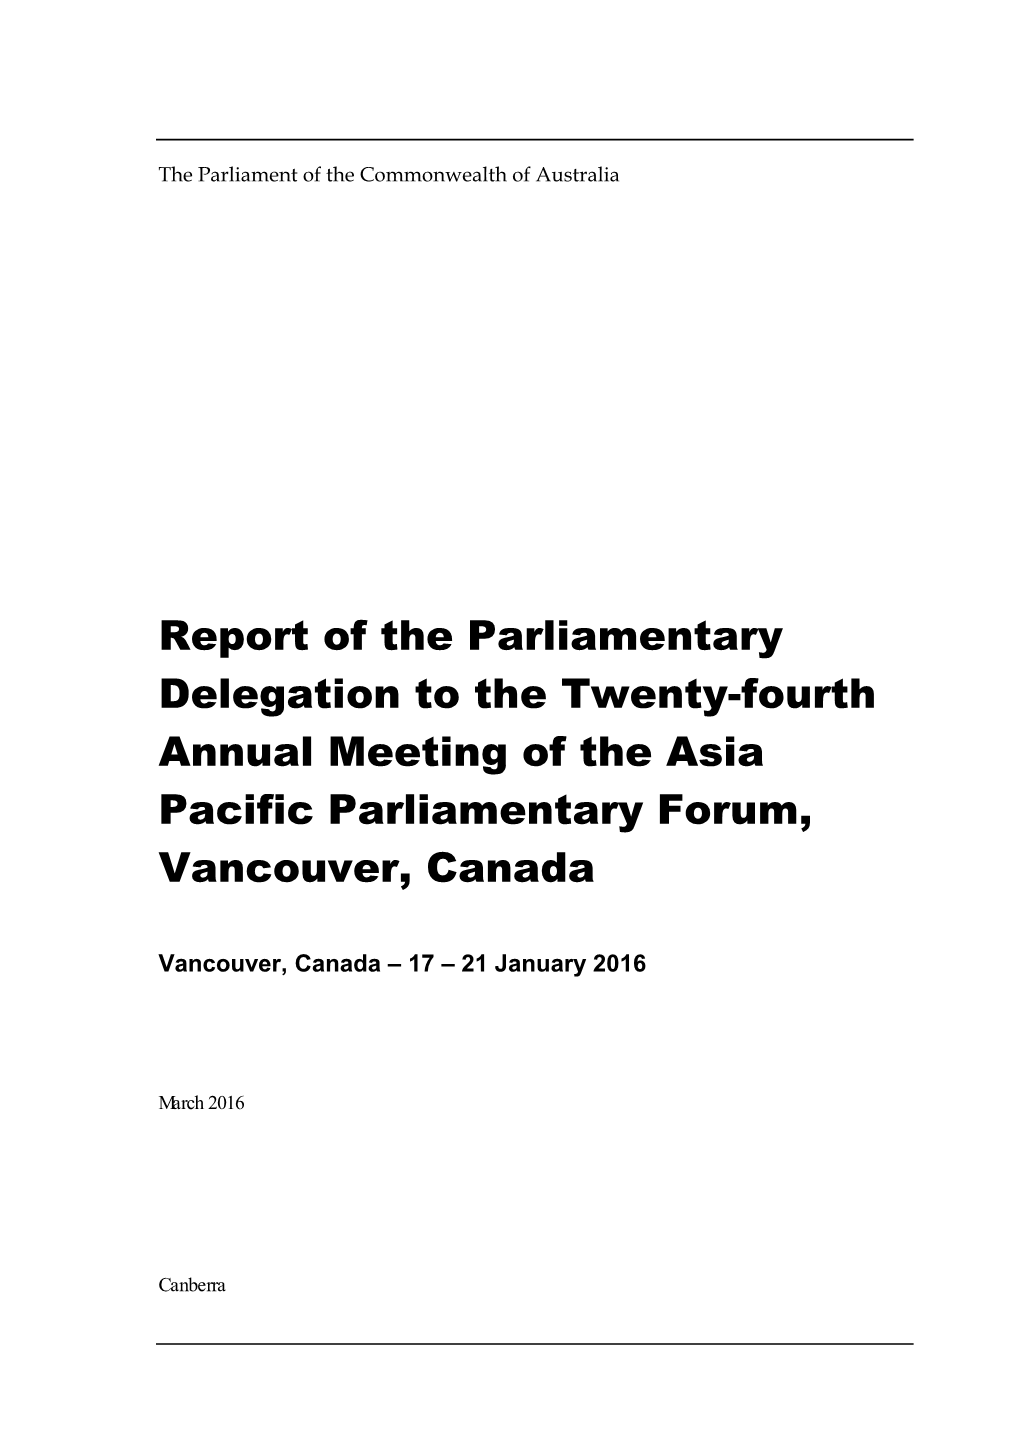 Report of the Parliamentary Delegation to the Twenty-Fourth Annual Meeting of the Asia Pacific Parliamentary Forum, Vancouver, Canada